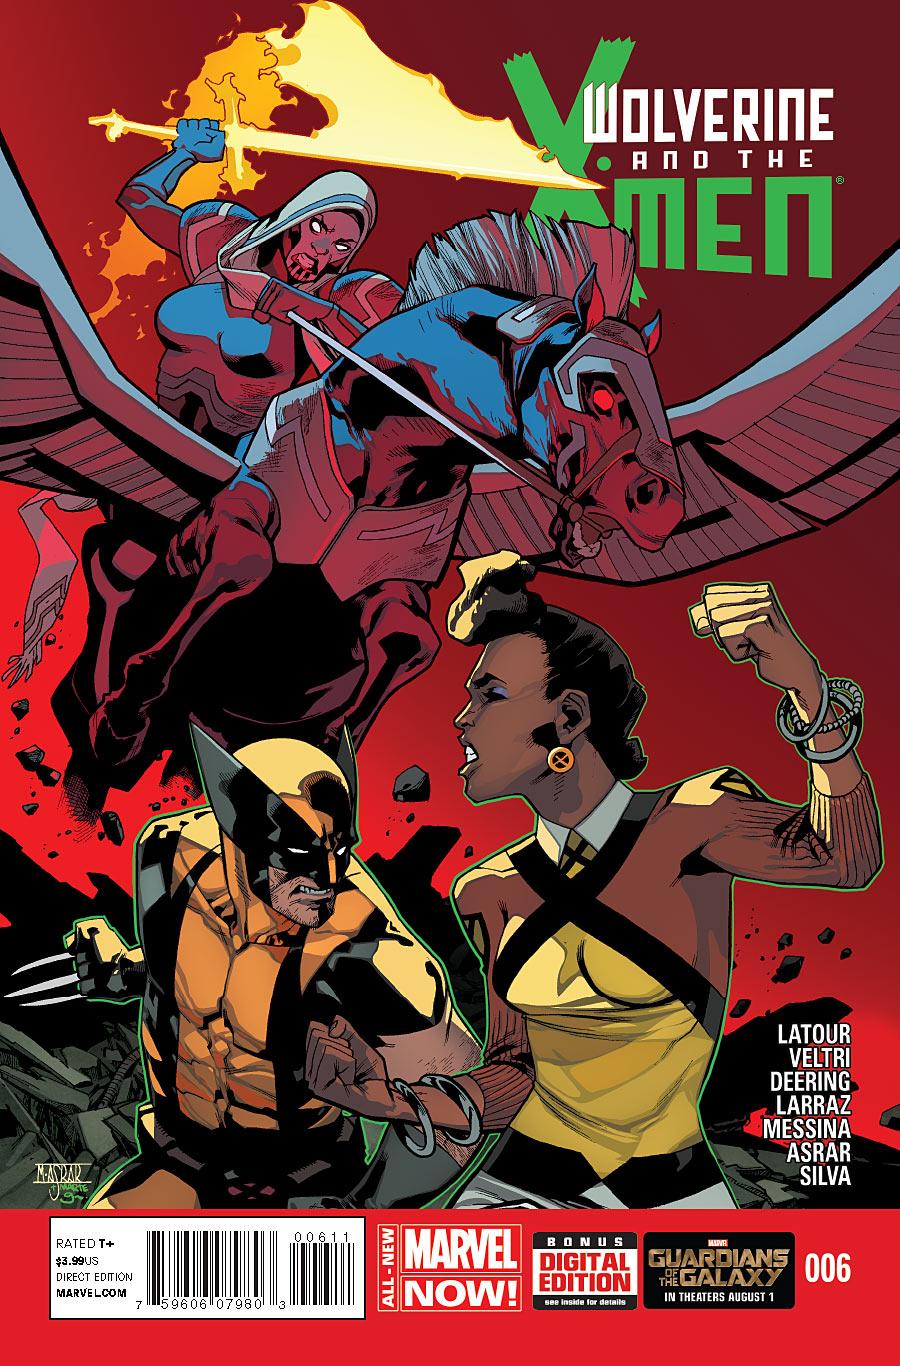 Wolverine and the X-Men Vol. 2 #6